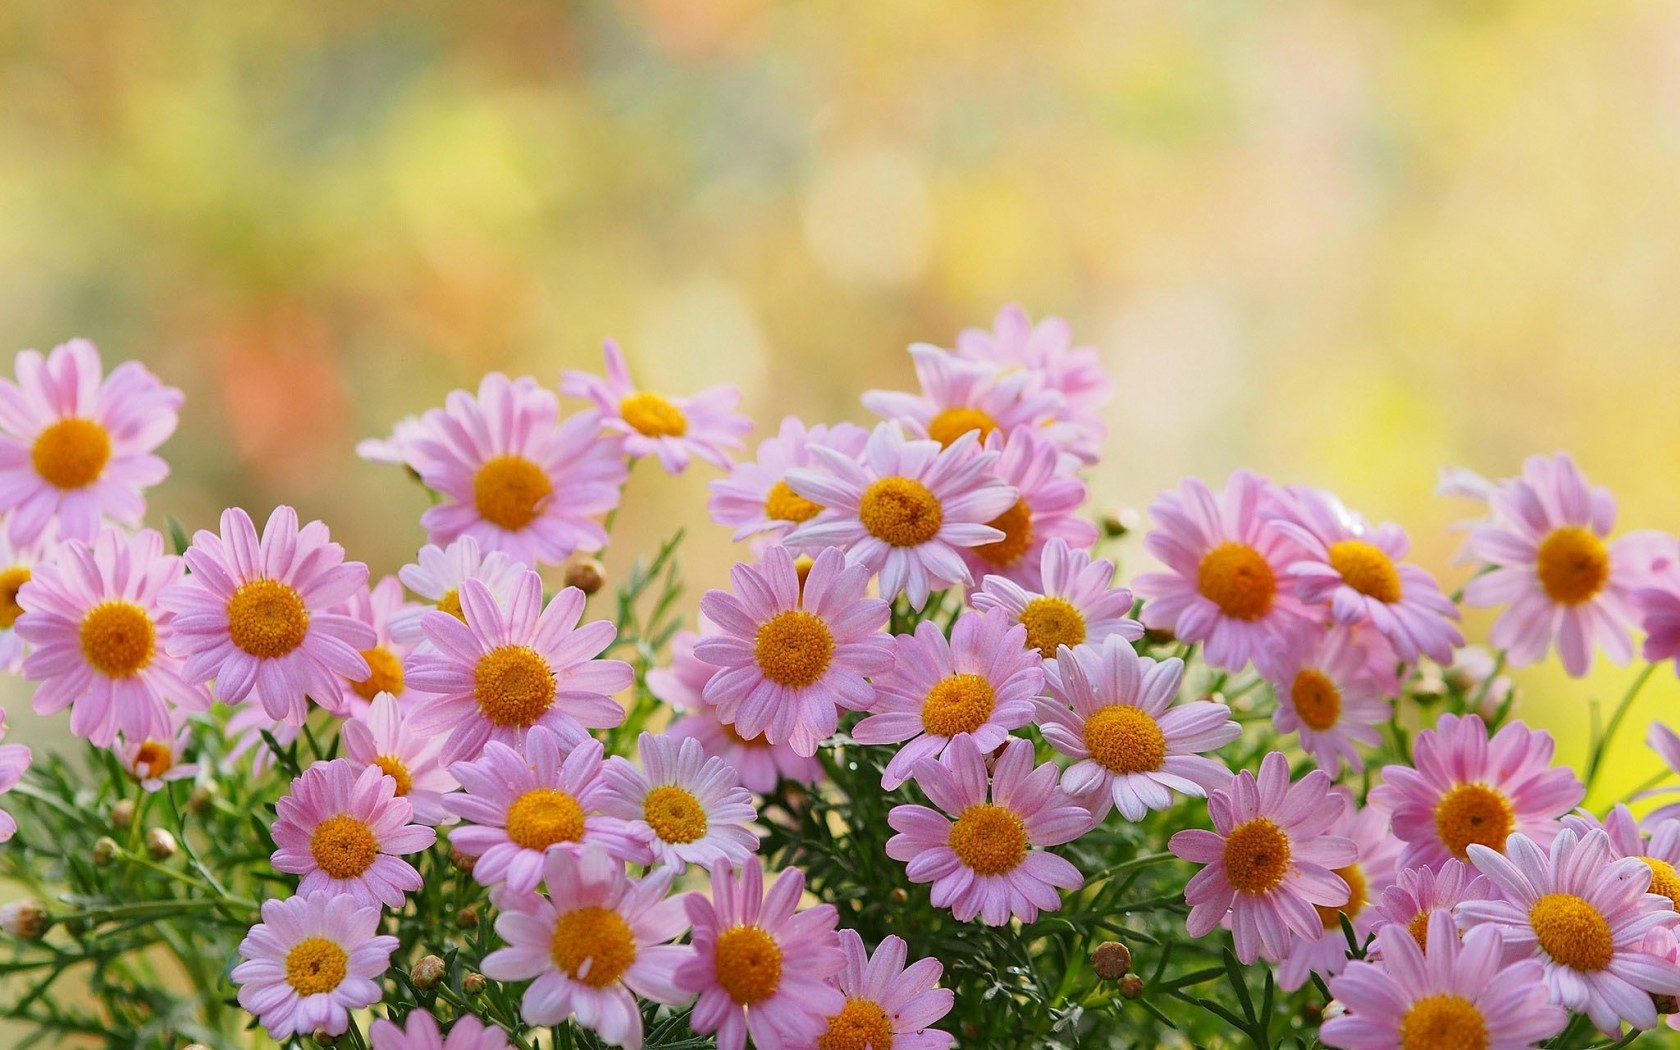 Earth Flower Camomile Daisy Pink Flower 1680x1050